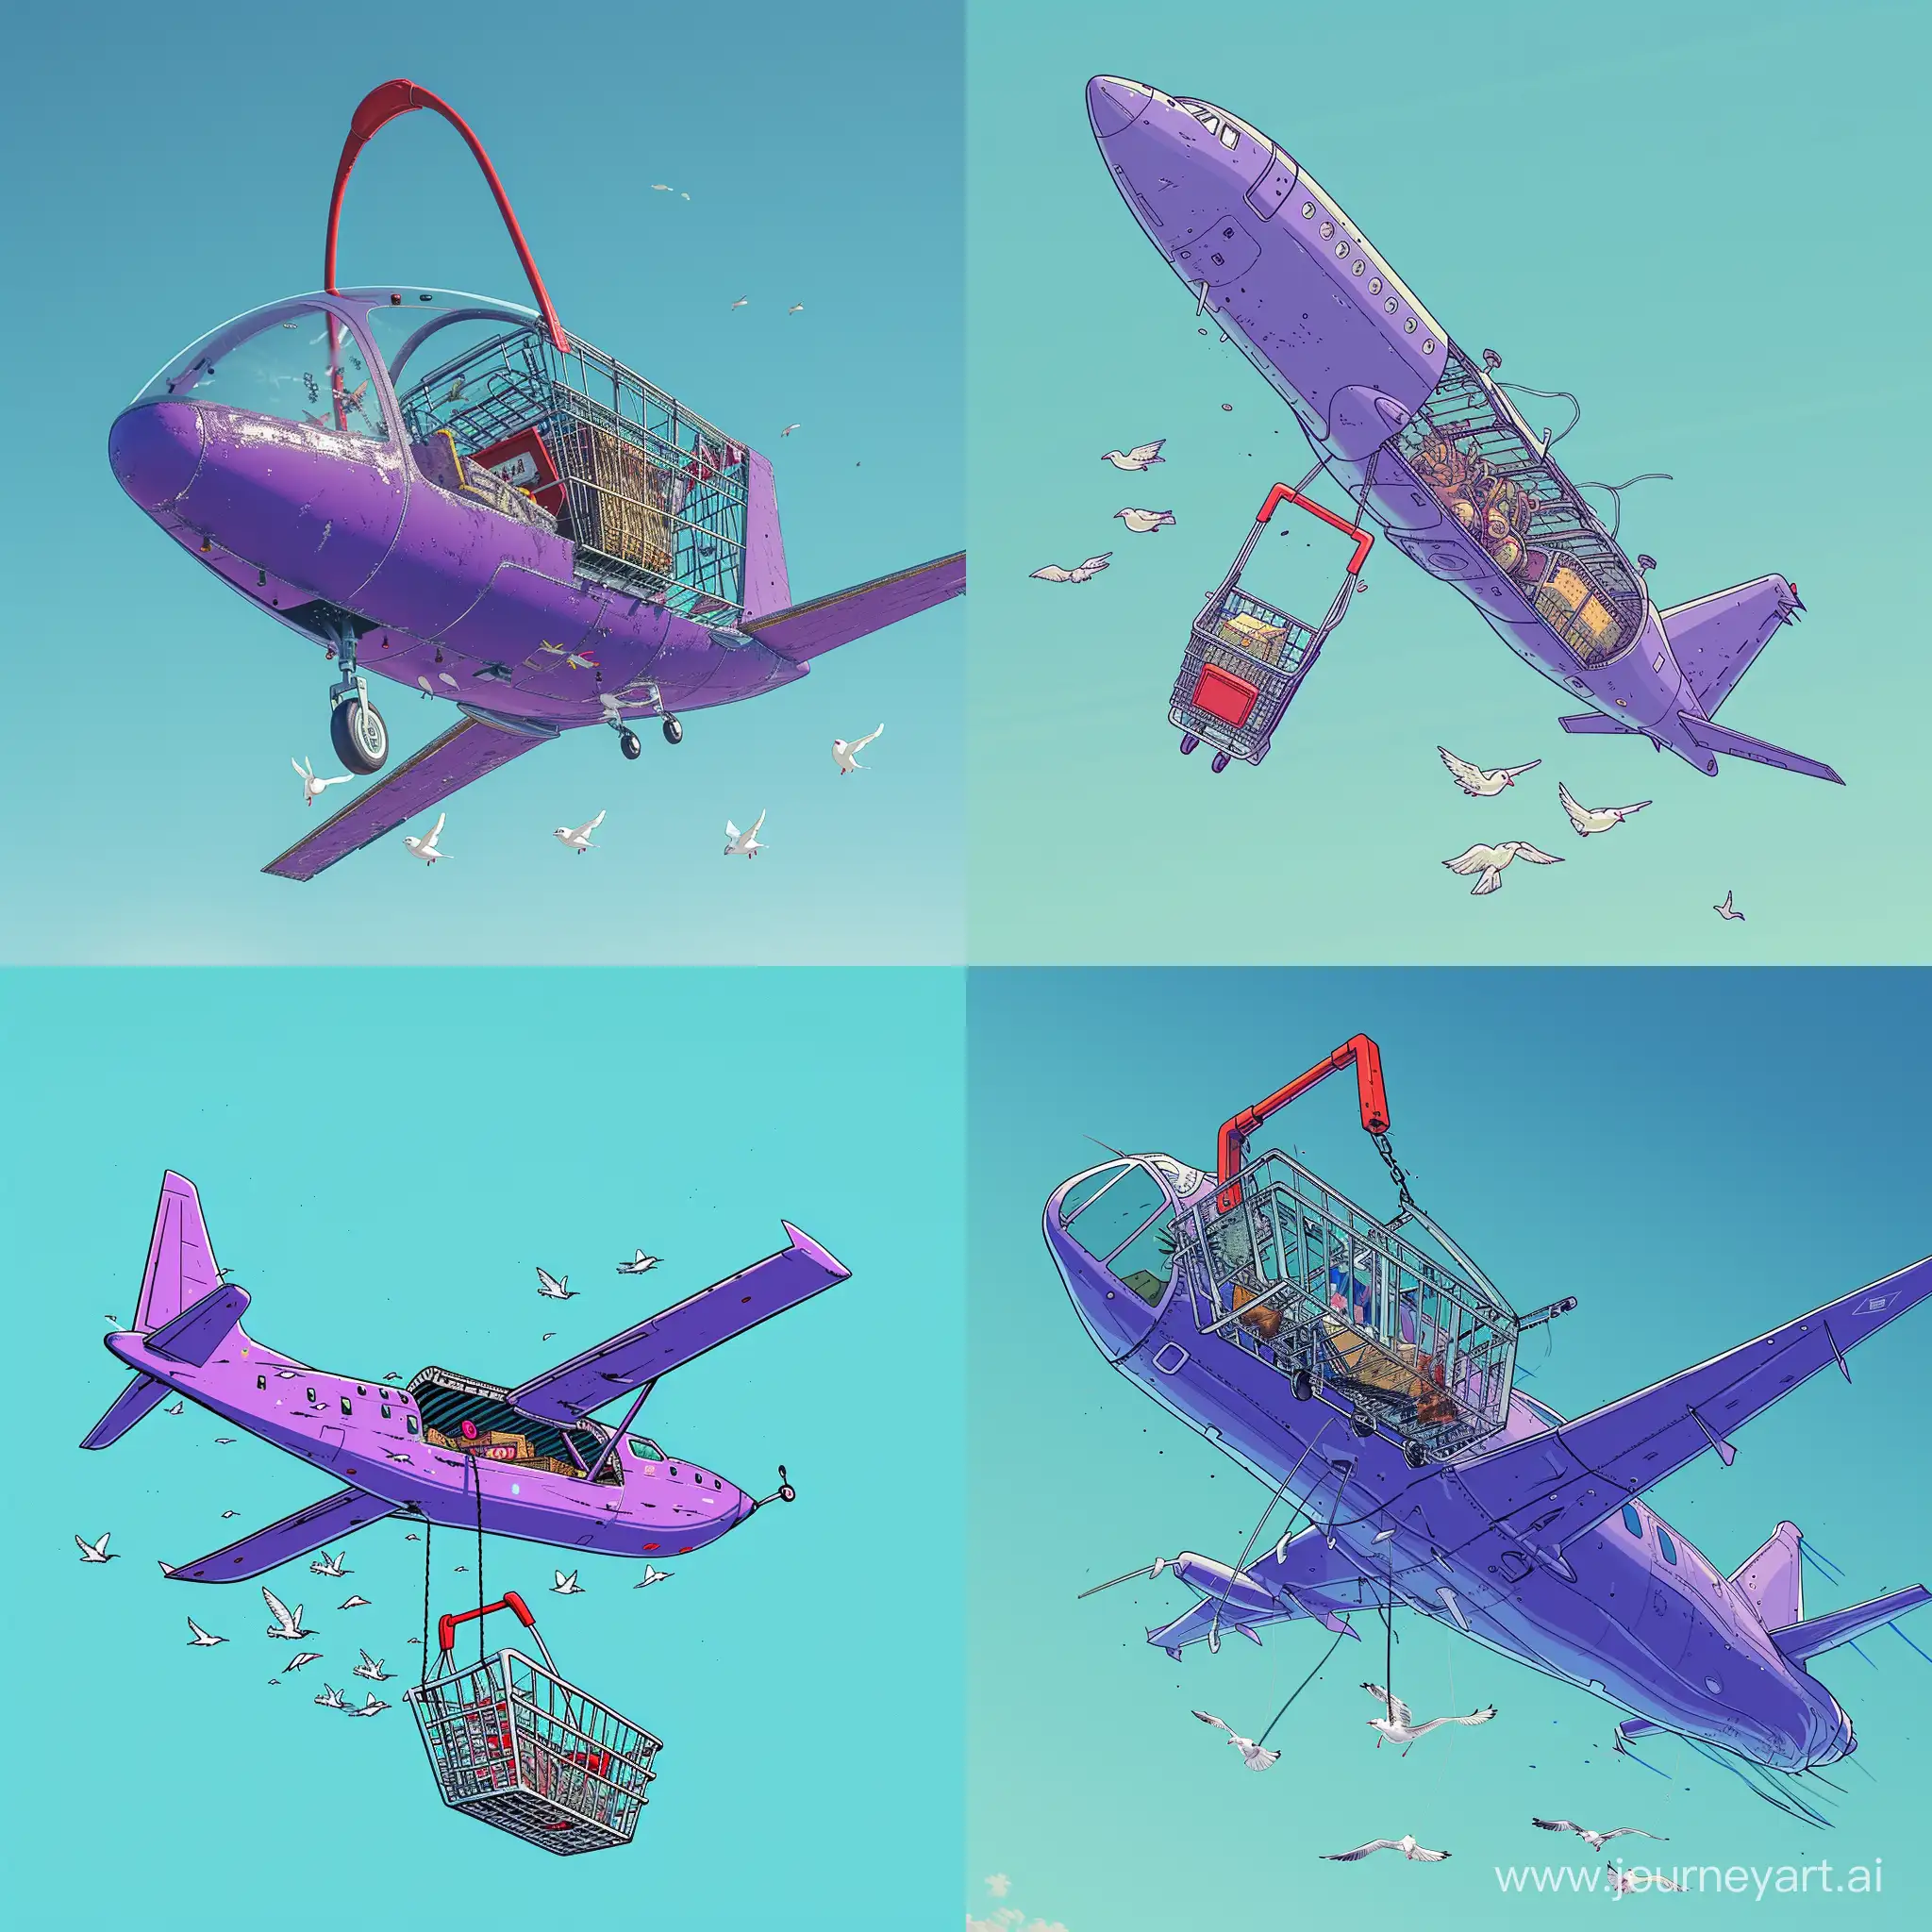 Vibrant-Purple-Airplane-Banner-with-Hanging-Shopping-Basket-and-Playful-Birds